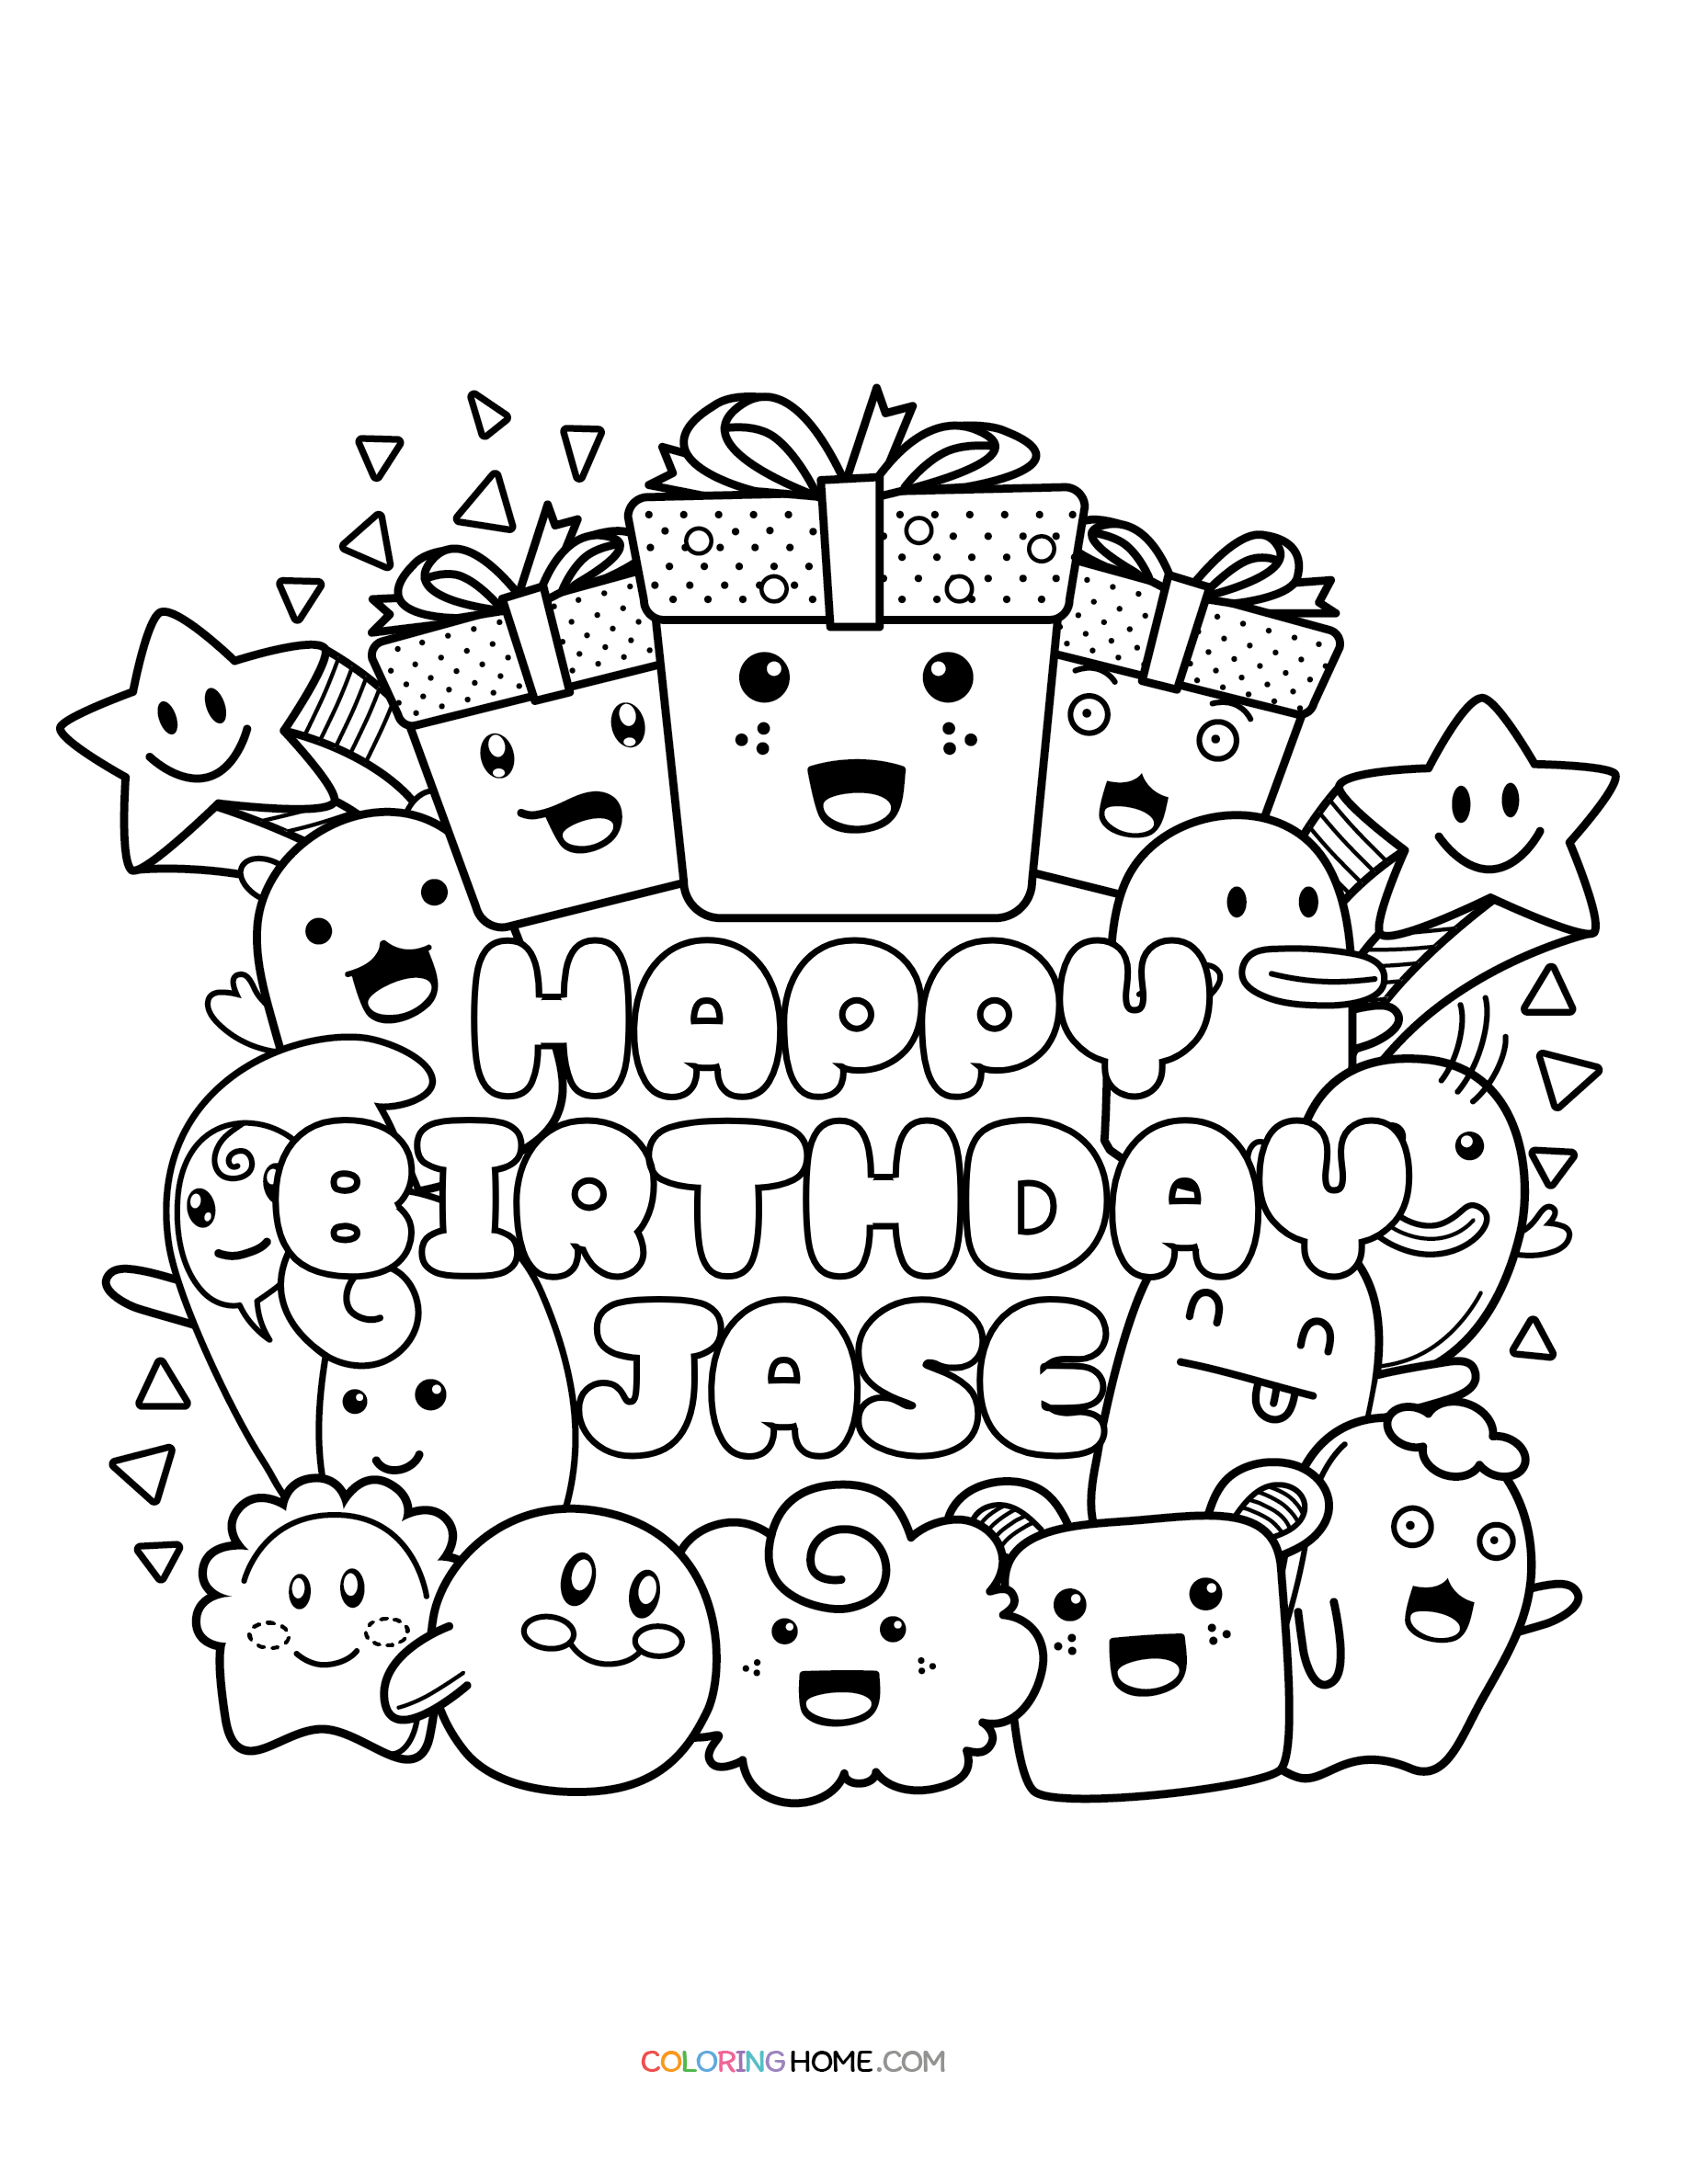 Happy Birthday Jase coloring page